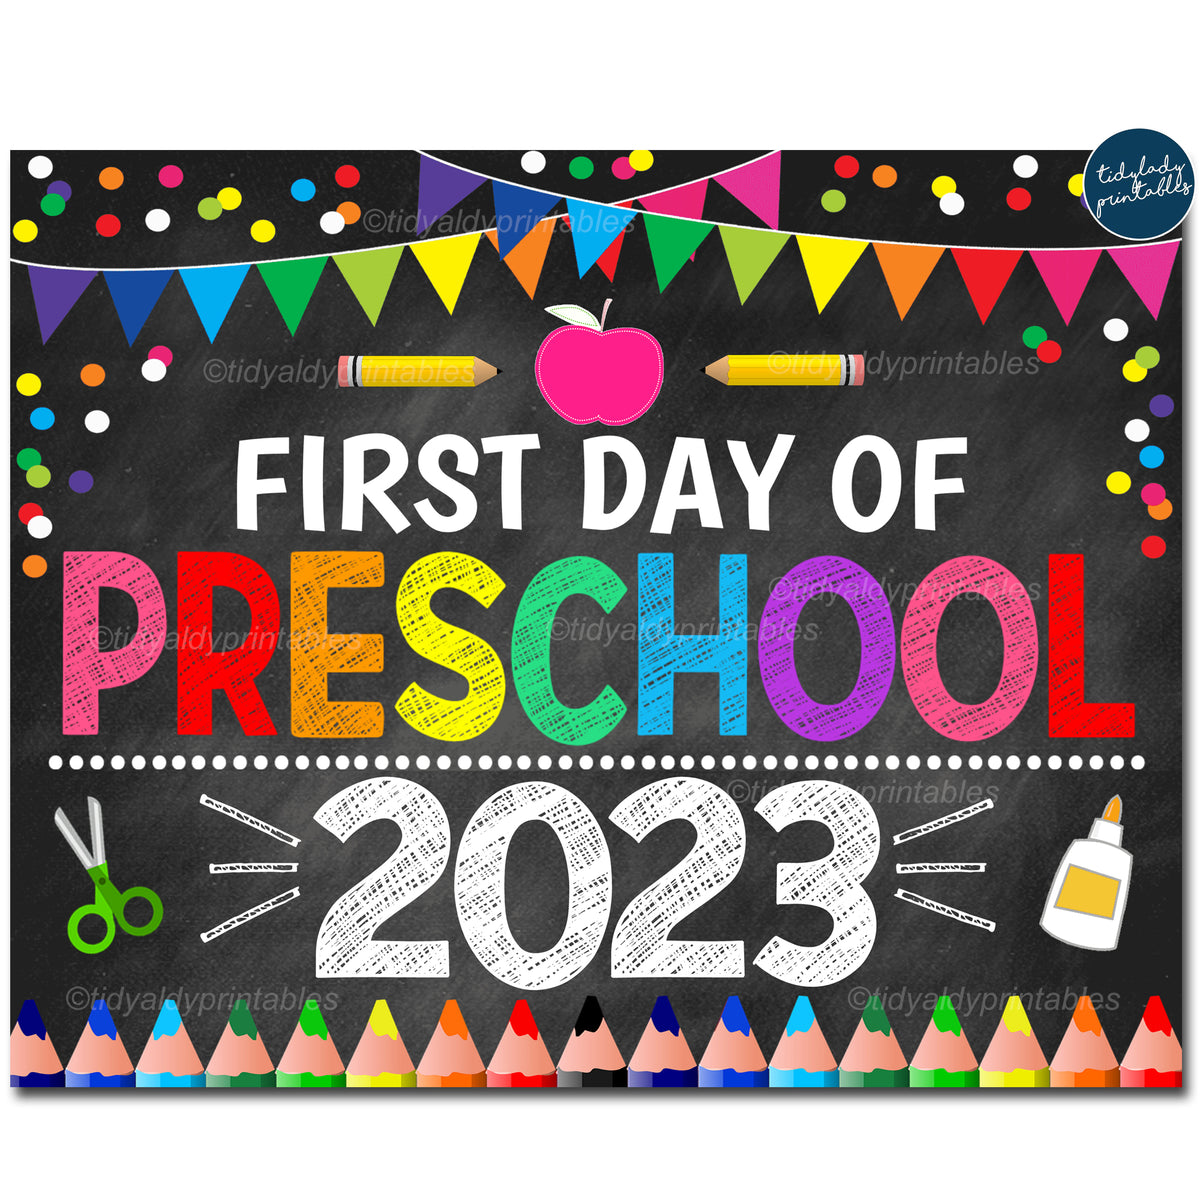 first-day-of-preschool-2023-school-sign-tidylady-printables